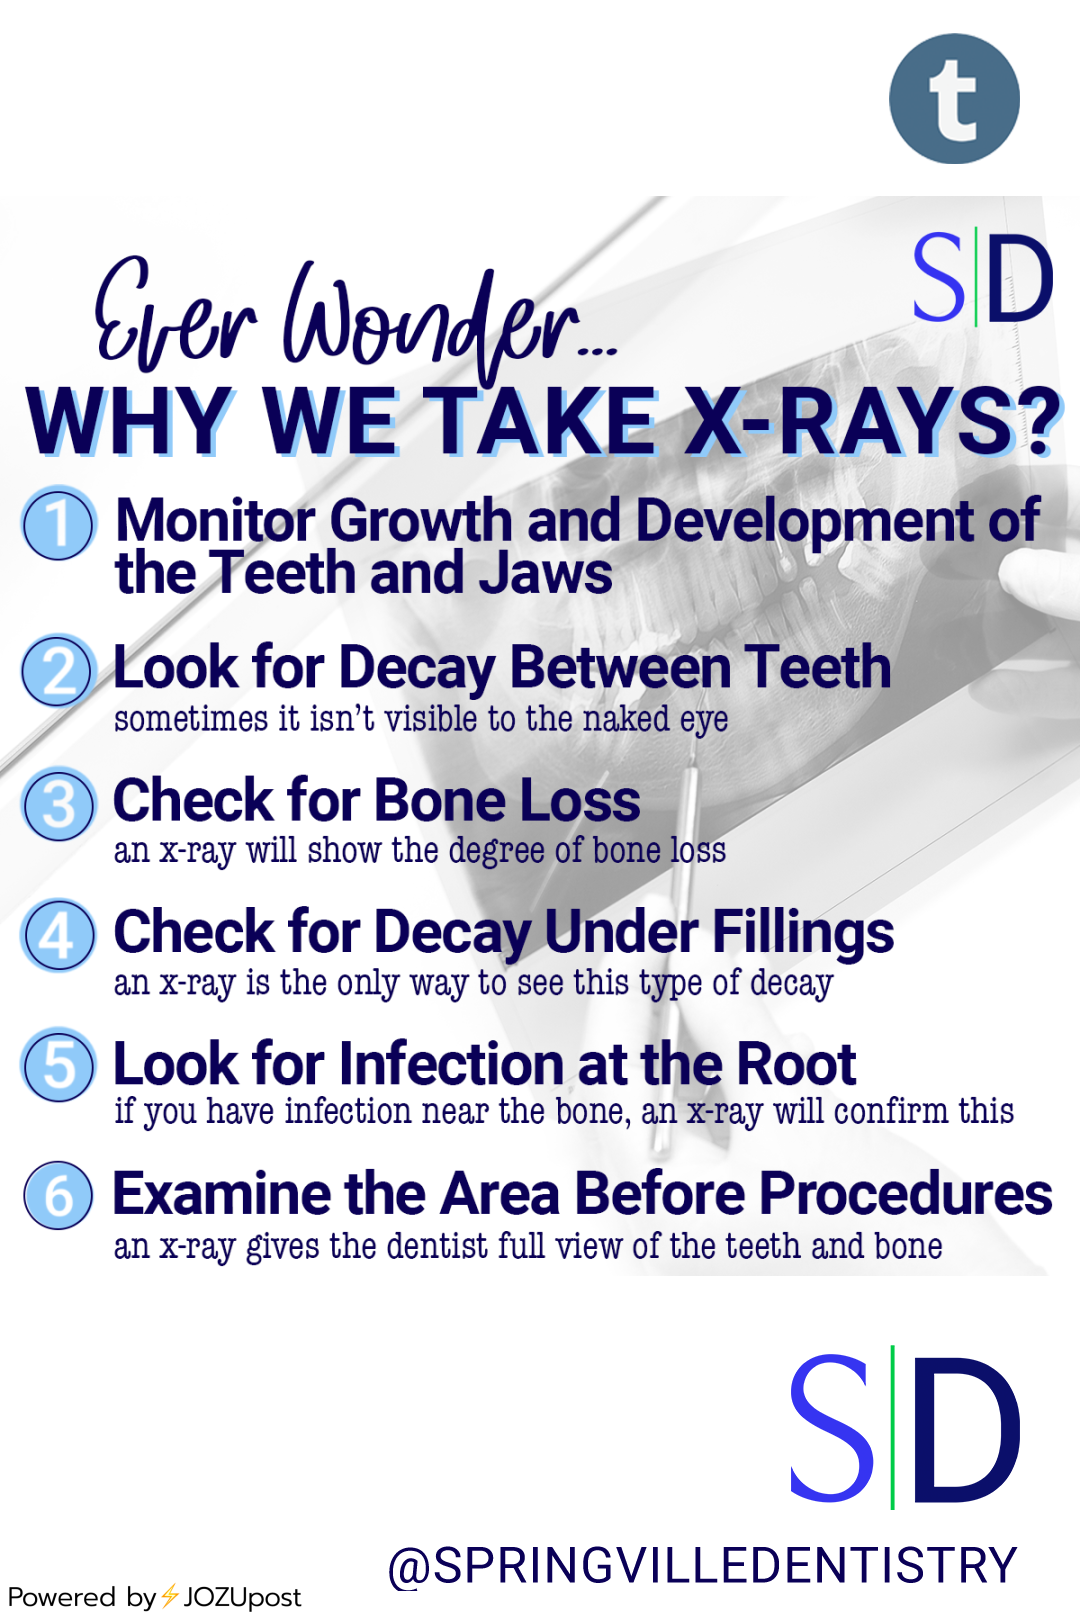 At Springville Dentistry, we use advanced tools like dental x-rays for comprehensive oral care.
Dental x-rays are essential for spotting hidden cavities and detecting infections not visible during a typical visual exam.
Our state-of-the-art digital...